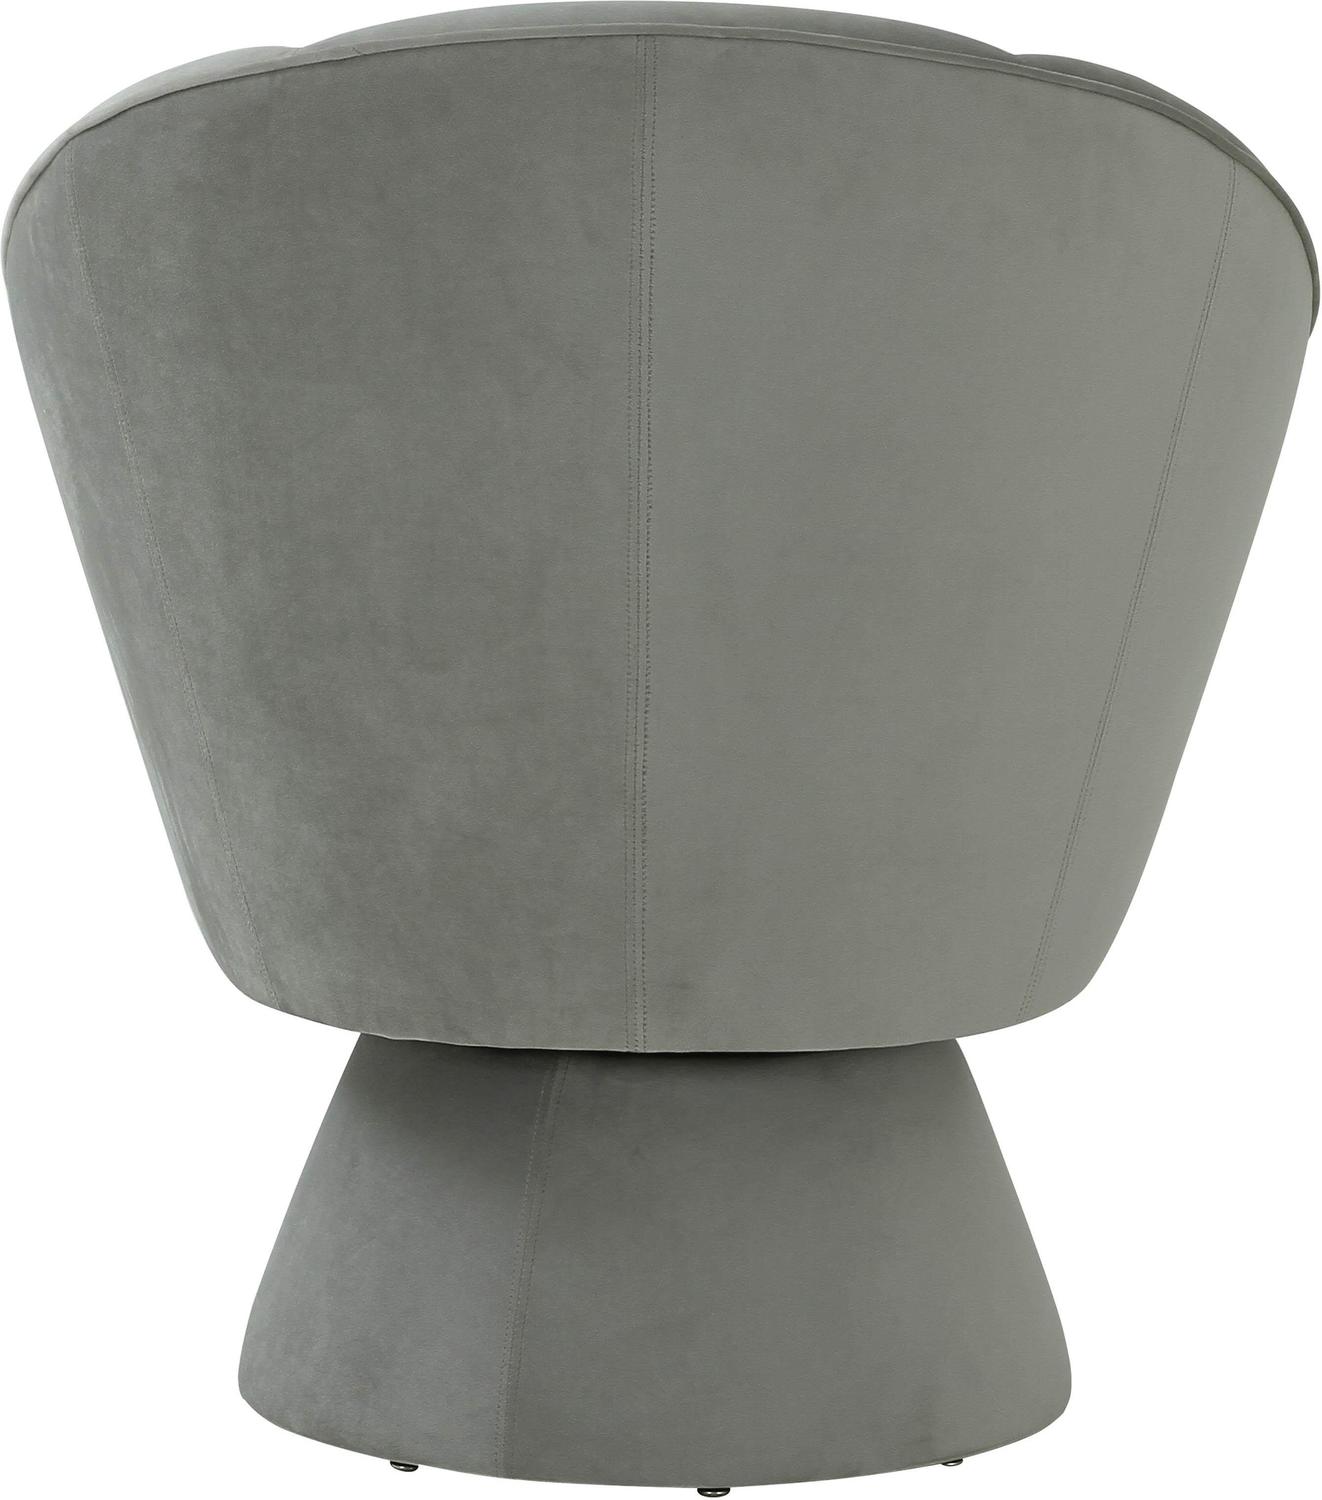 leather chair with arms Contemporary Design Furniture Accent Chairs Grey